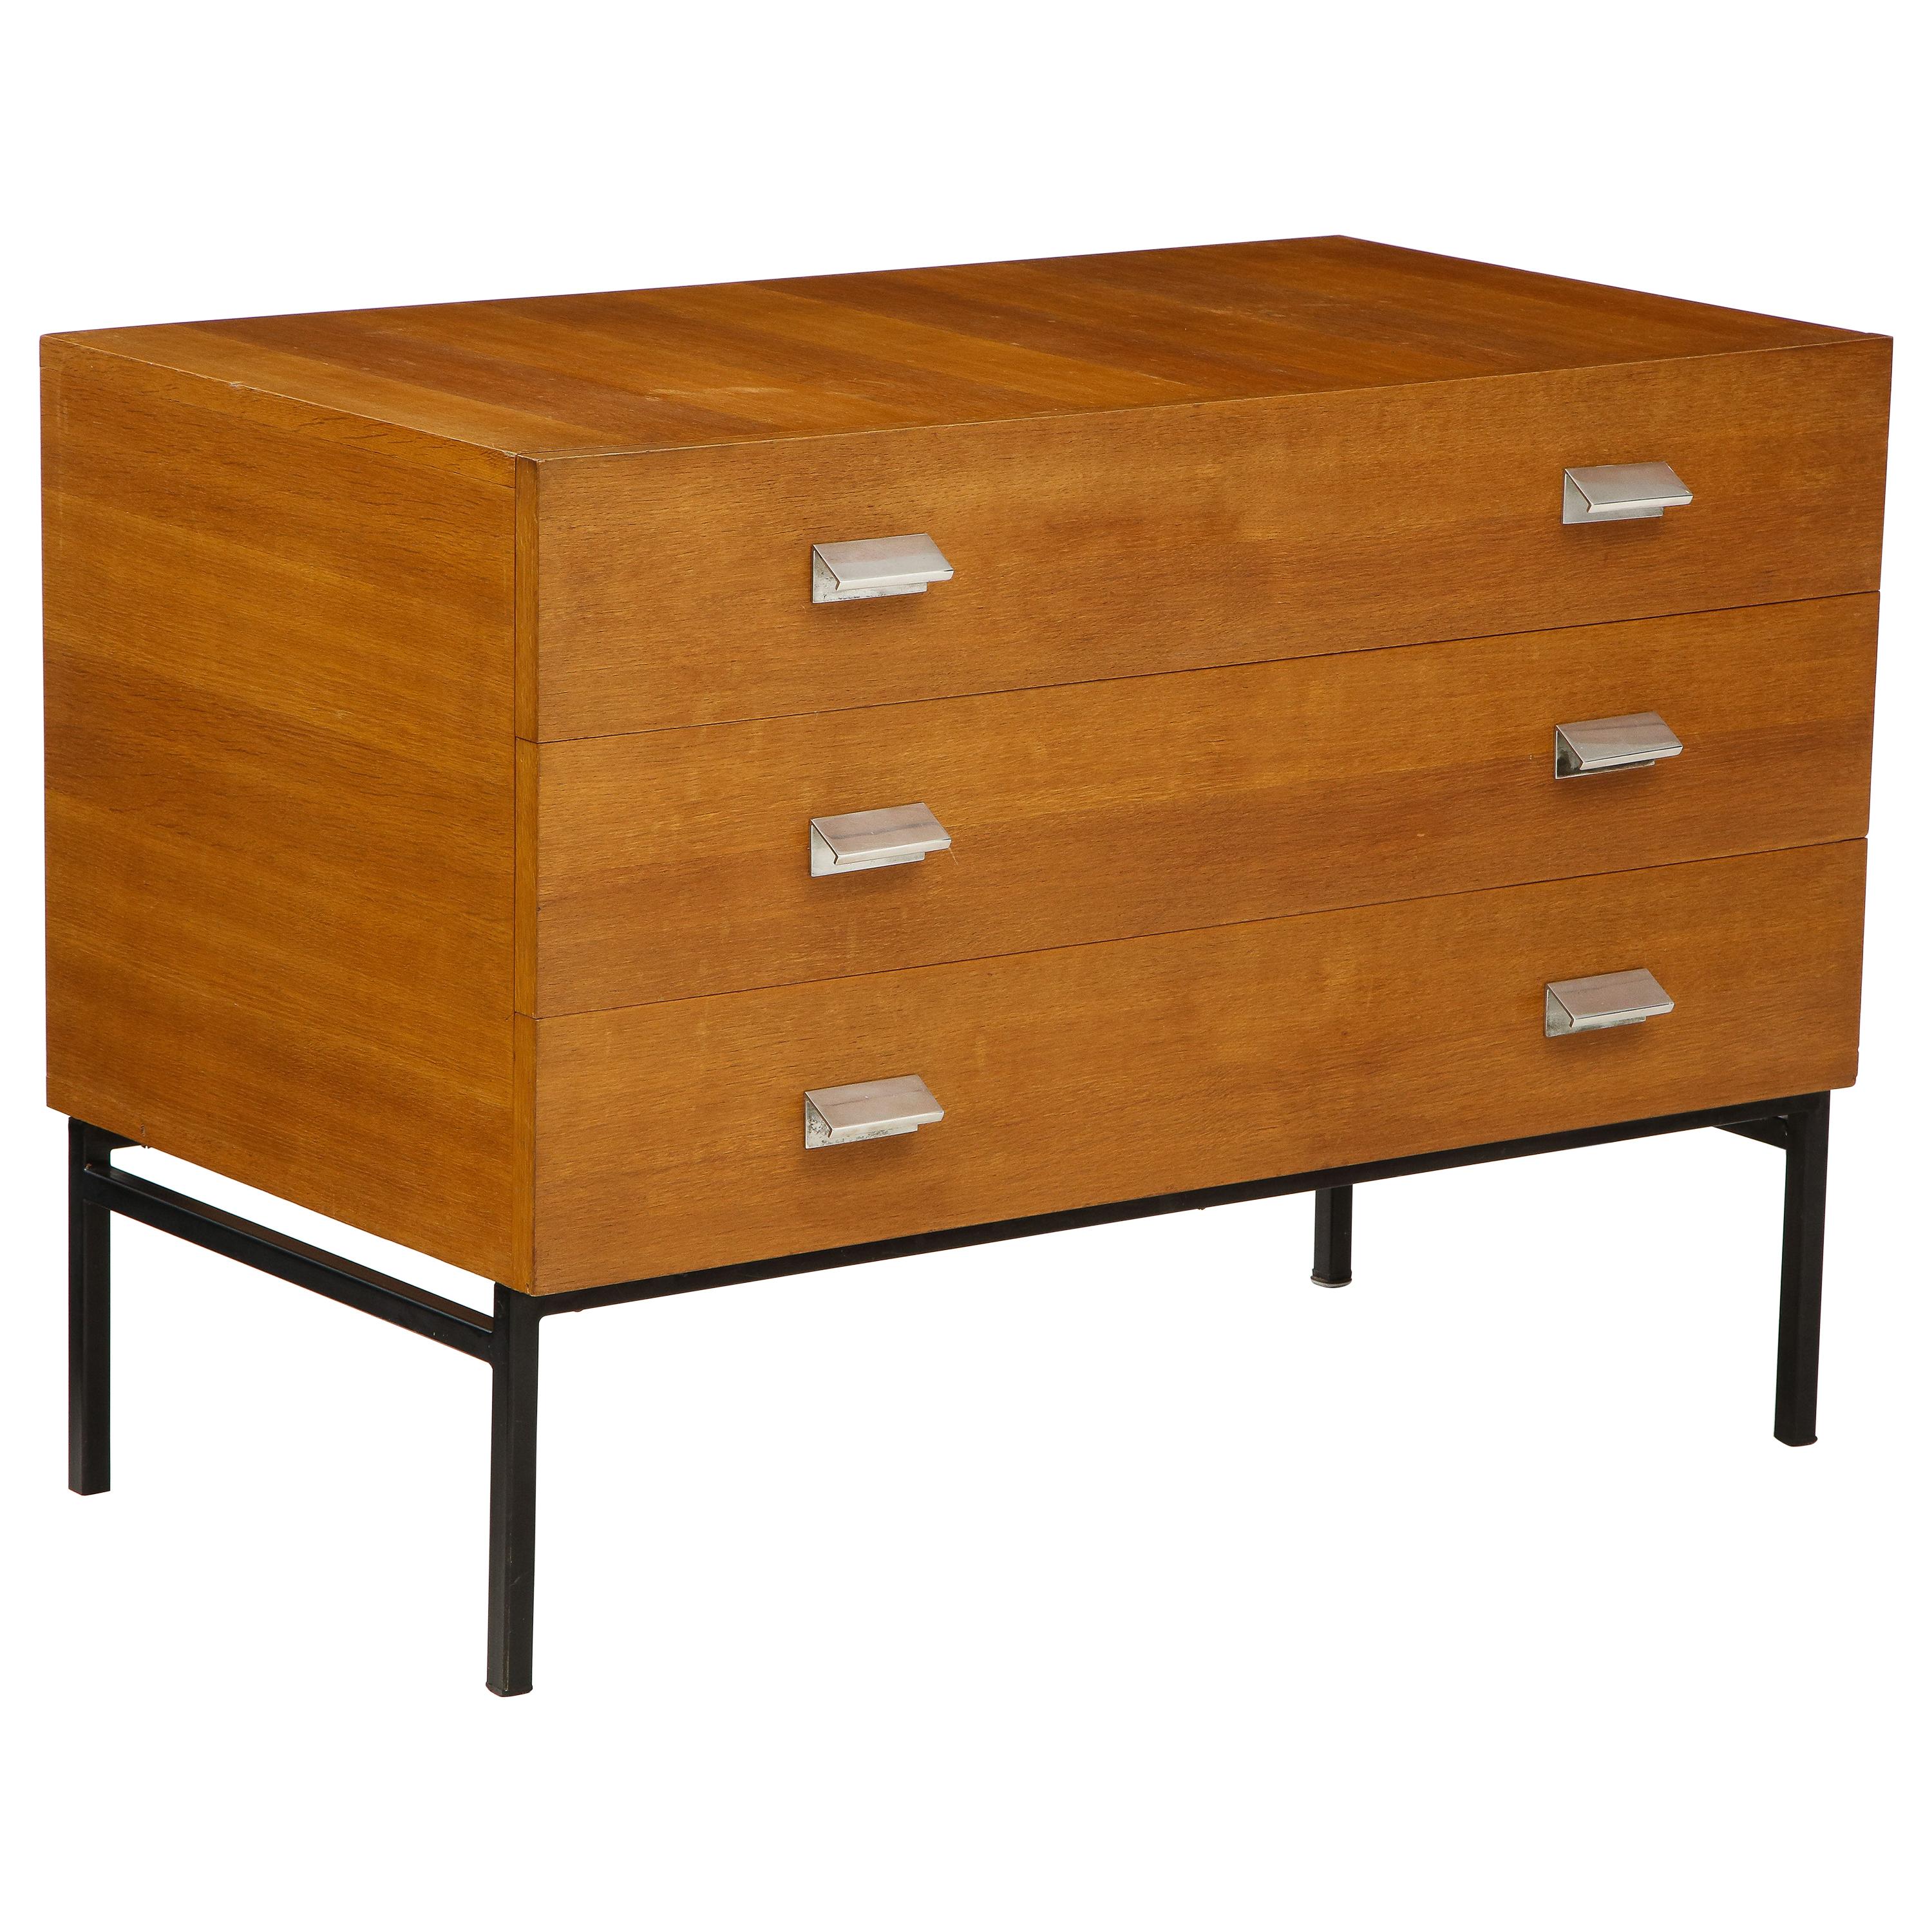 Rare Model 812 Chest of Drawers by Andre Monpoix, France, c. 1955